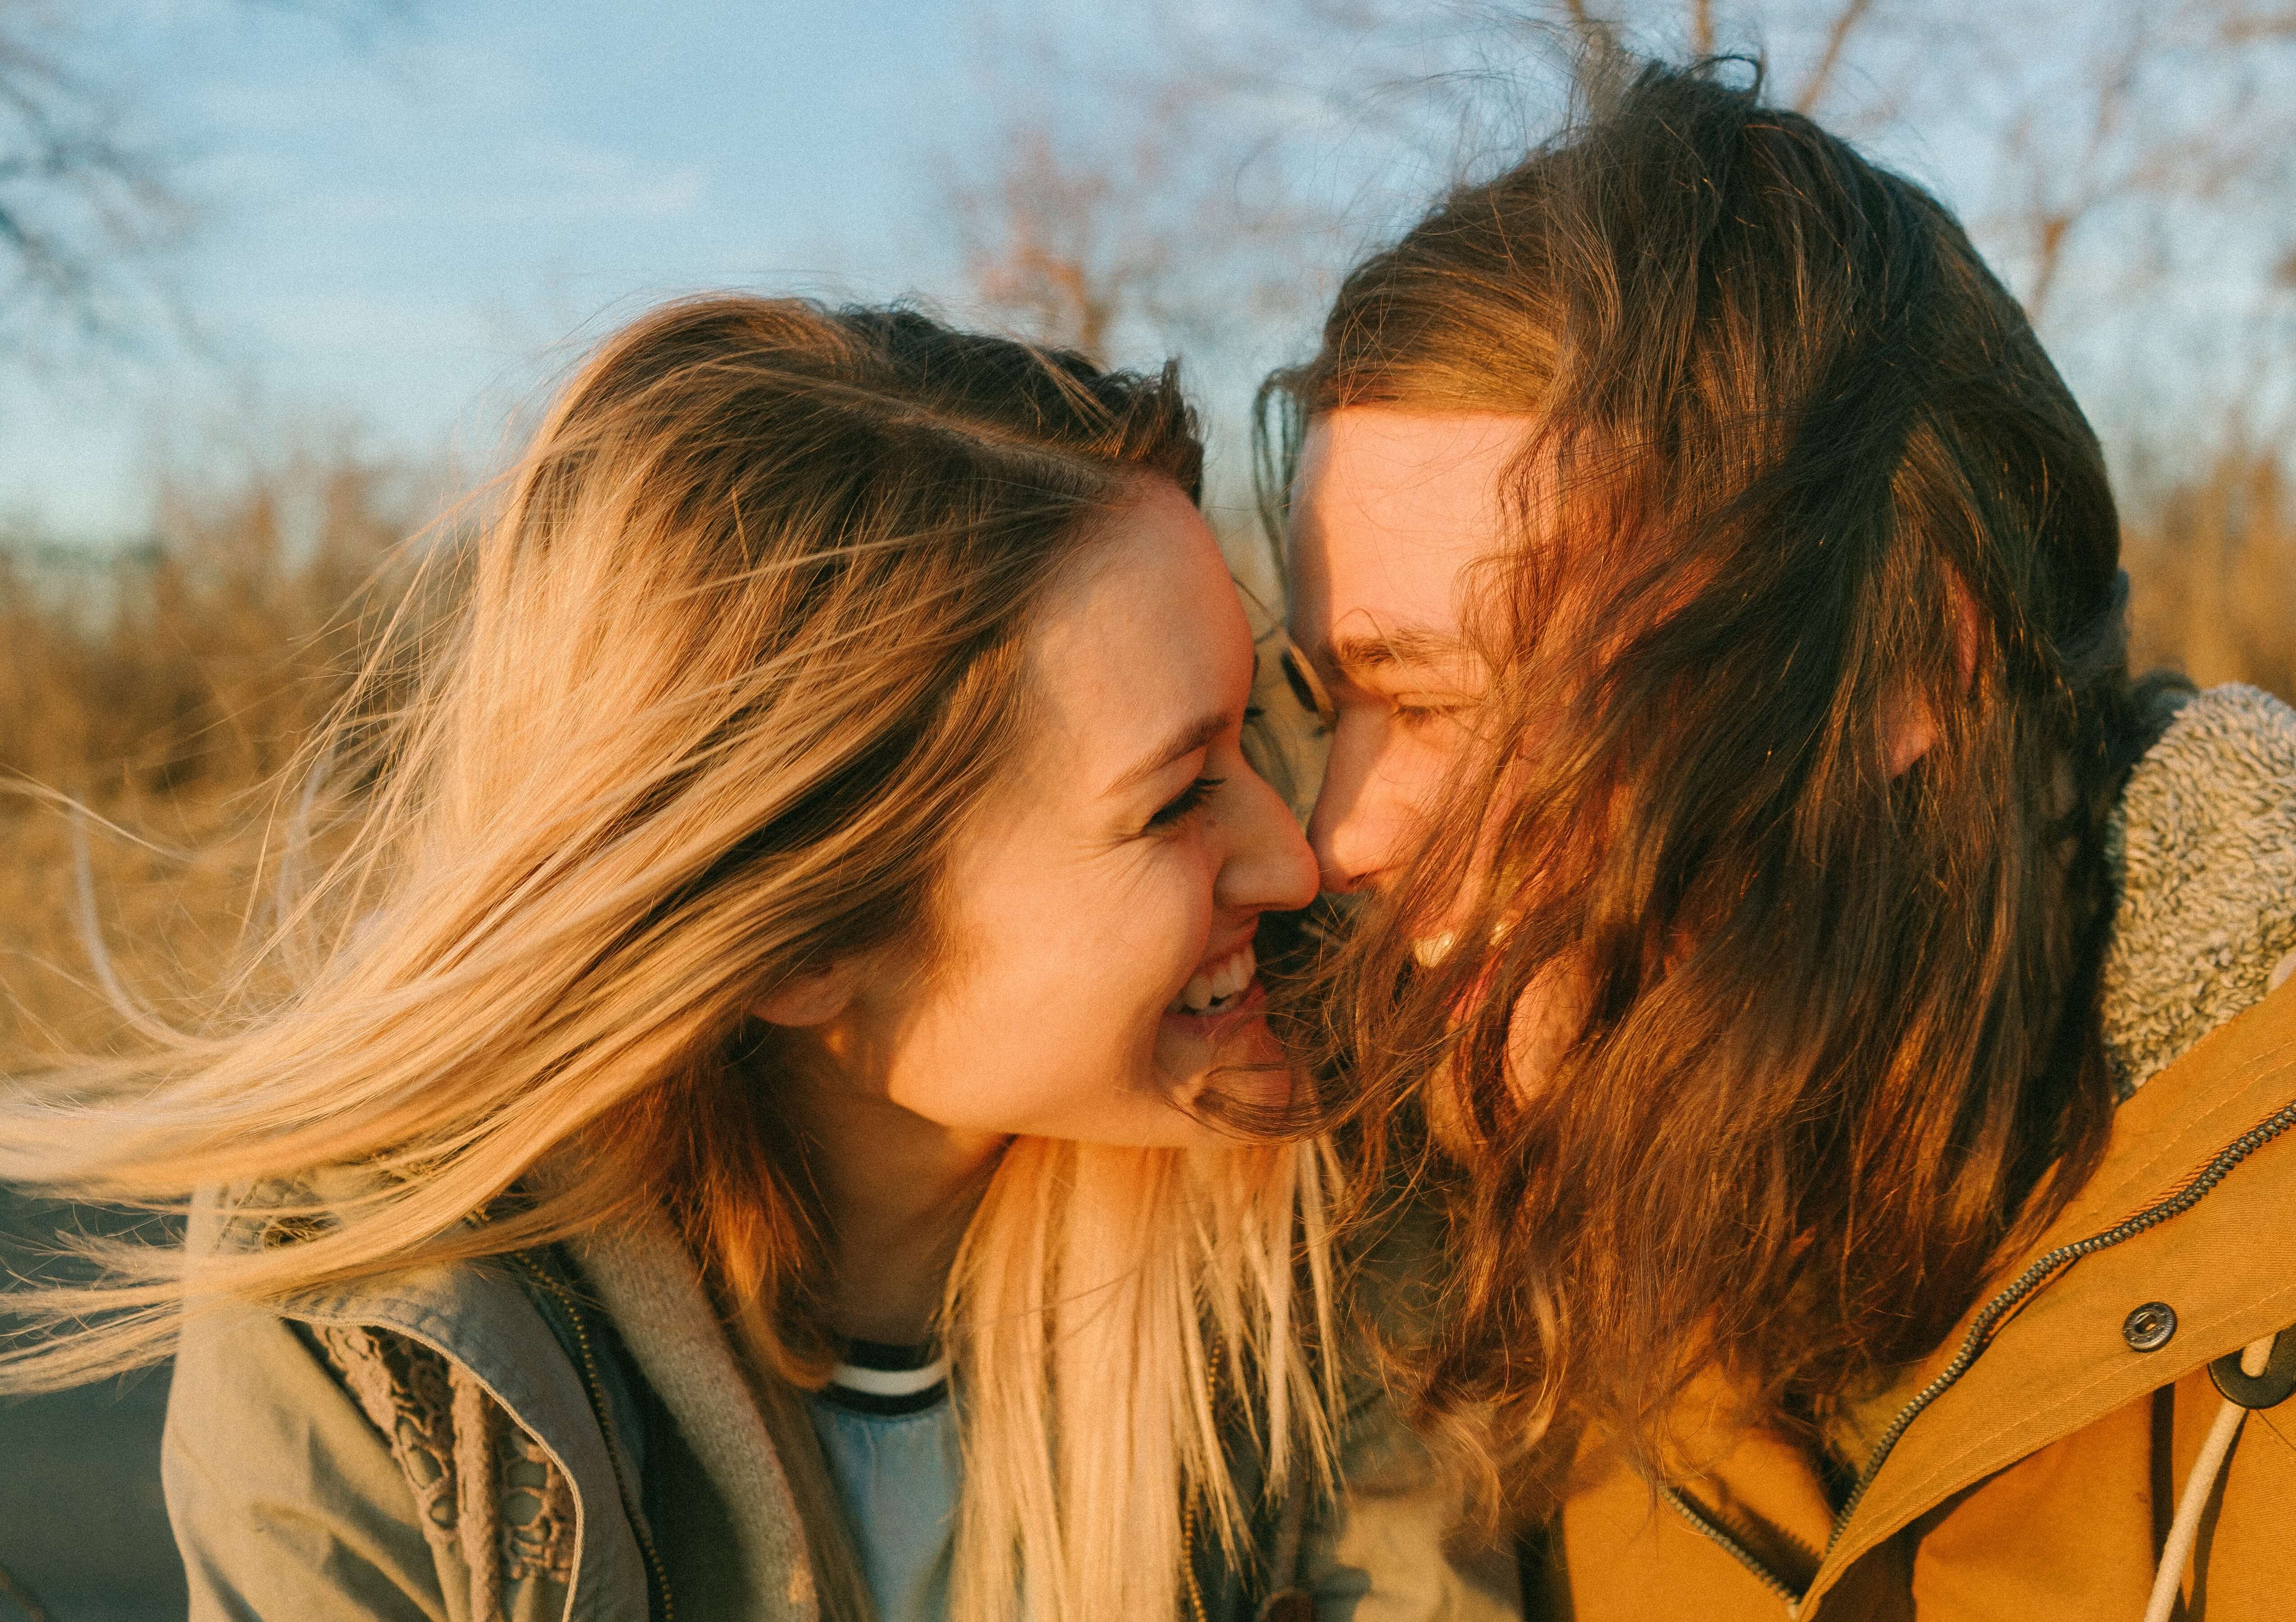 5 Easy Ways To Communicate Better in Your Relationships Learn 4